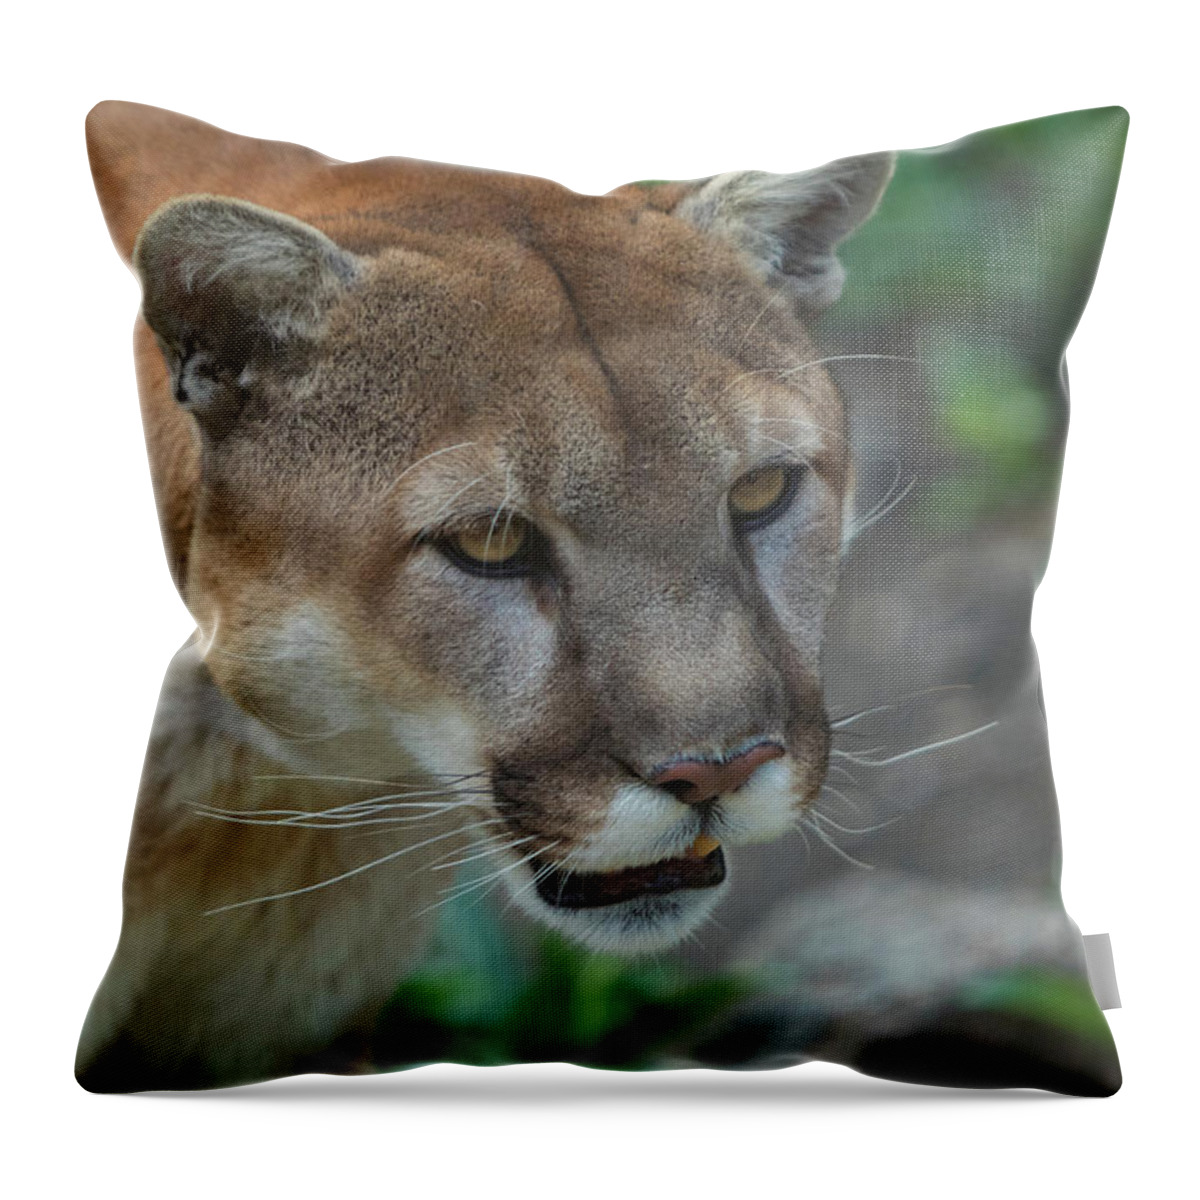 Cougar Throw Pillow featuring the photograph Puma by Randy Robbins